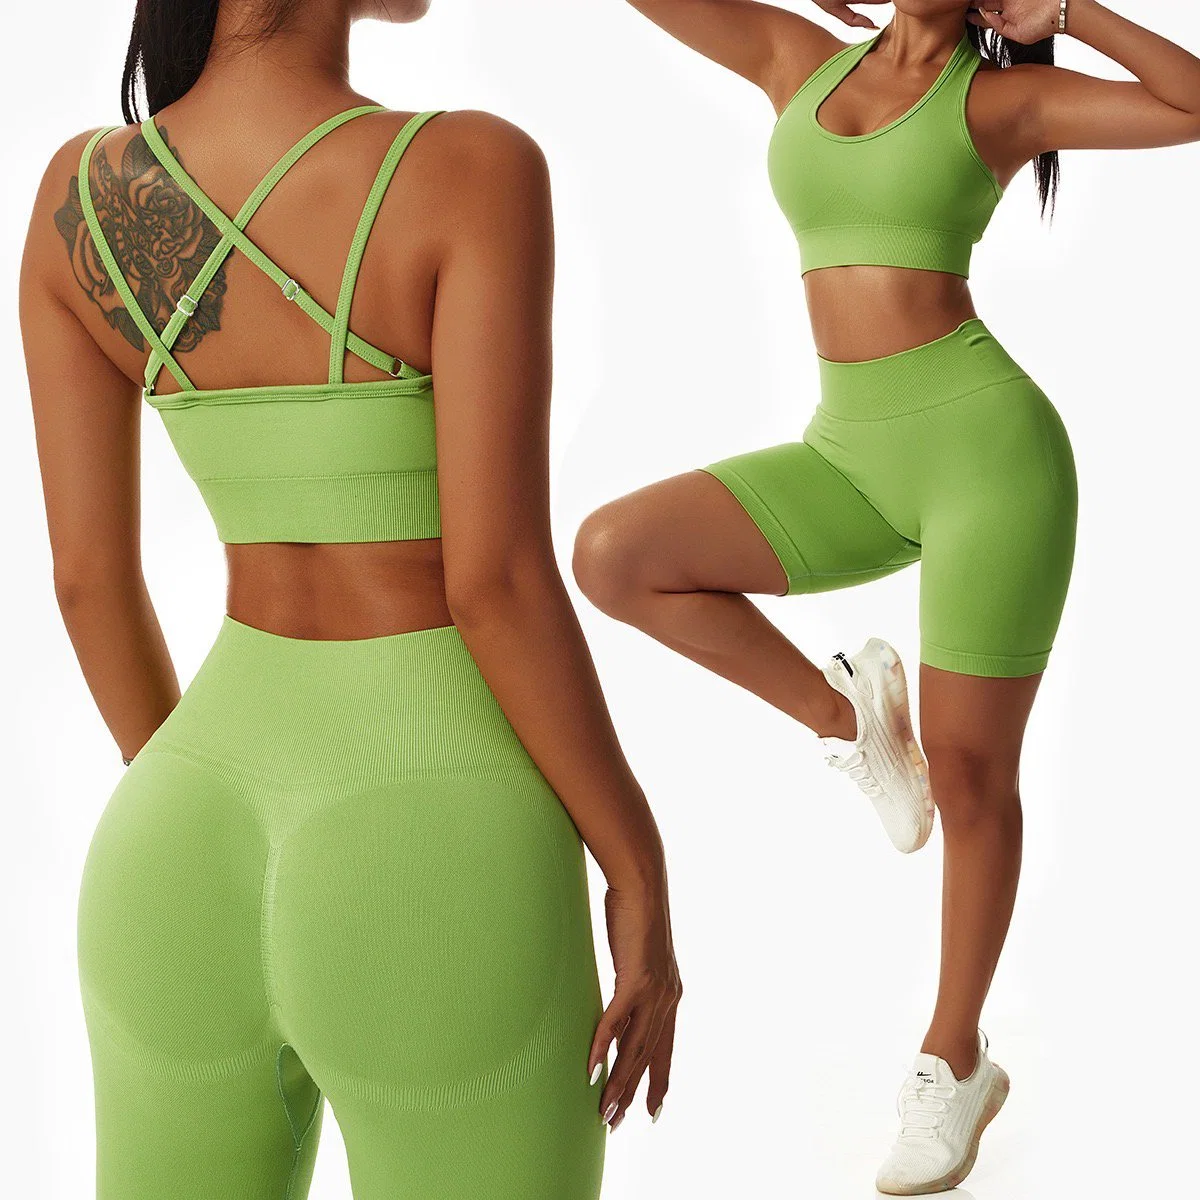 2/3/4PCS Sexy Summer Activewear Seamless Casual Apparel for Women, Halter Neck + Strappy Back Sports Bra + Scrunch Shorts + Yoga Pants Matching Workout Set